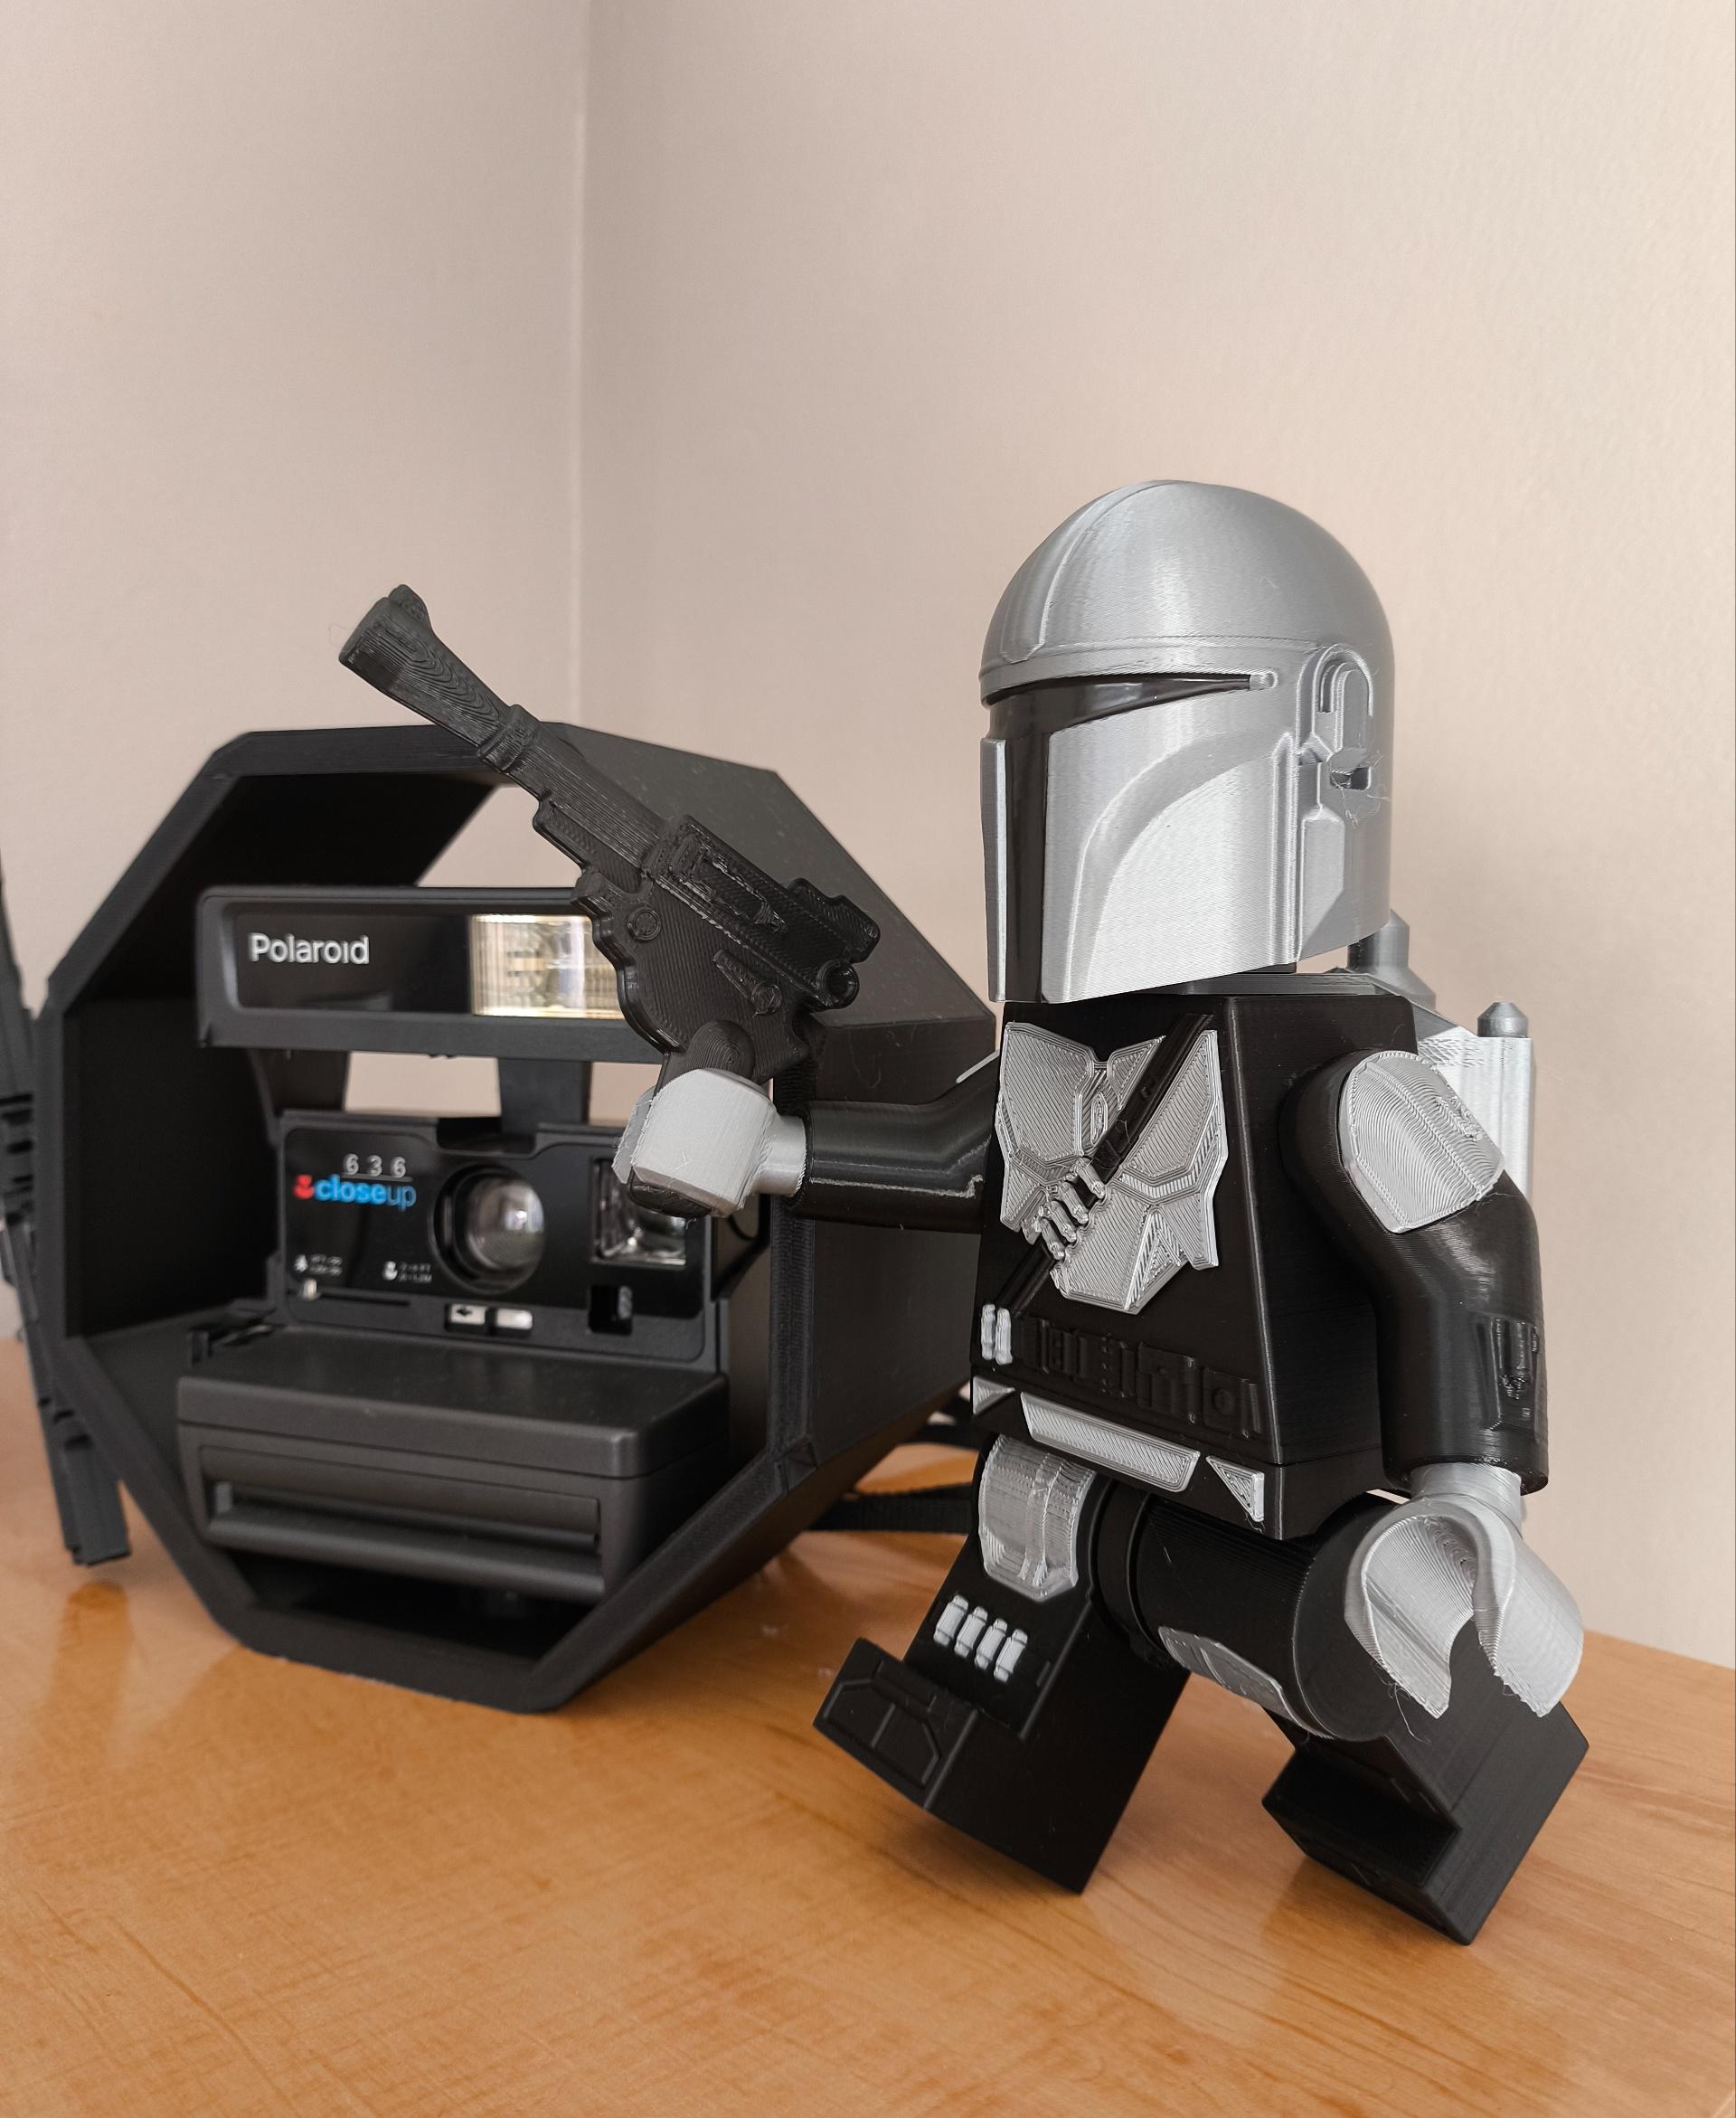 The Mandalorian (9 inch brick figure, NO MMU/AMS, NO supports, NO glue) - This is amazing!
Don't forget to make the XY compensation adjustment with the test piece. So that everything fits perfectly when calibrating your printer. I already had trouble with this in Stormtrooper.https://www.thingiverse.com/thing:342198 - 3d model